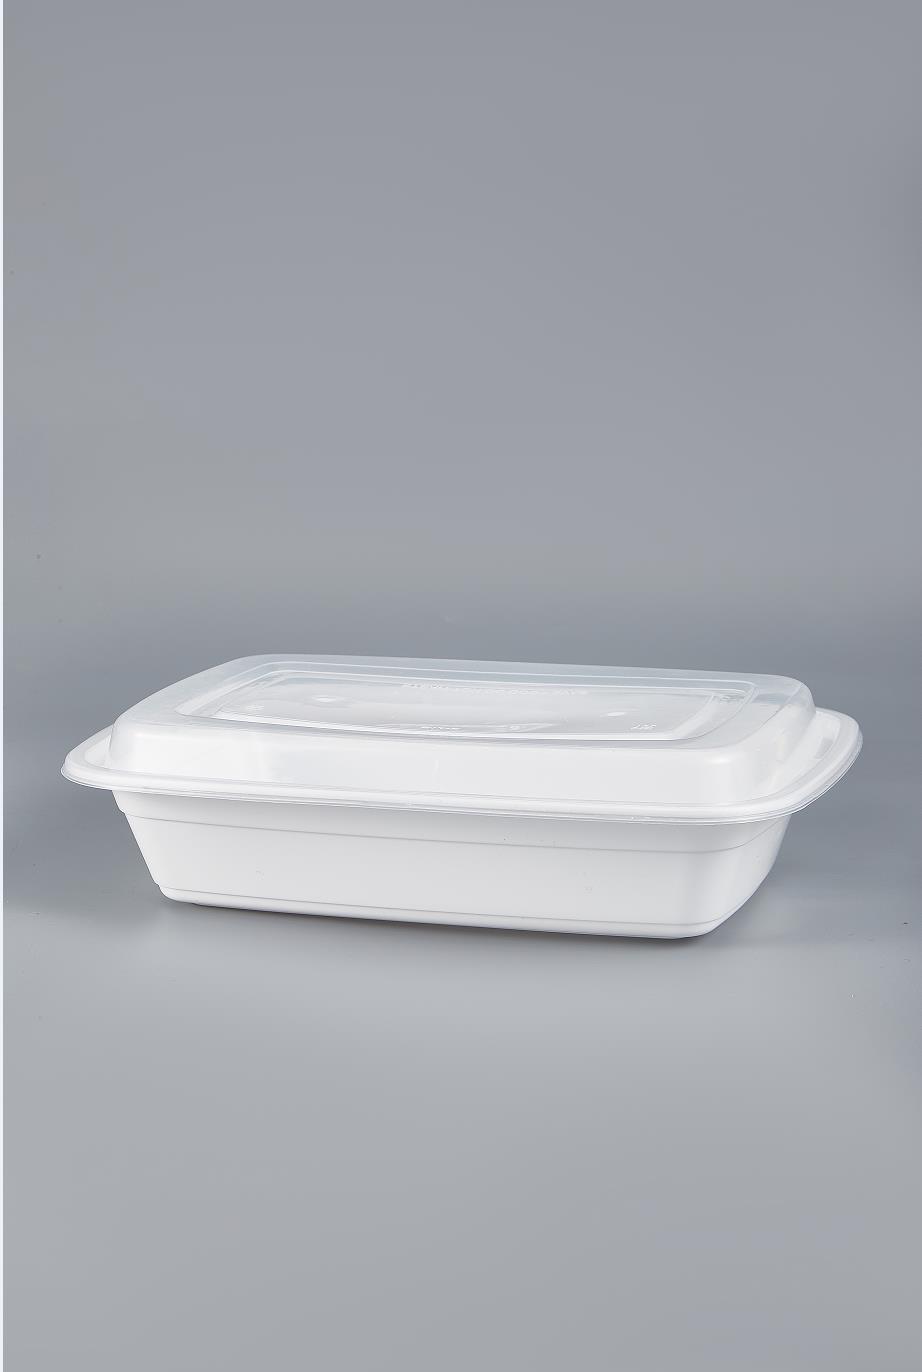 878Container&lid